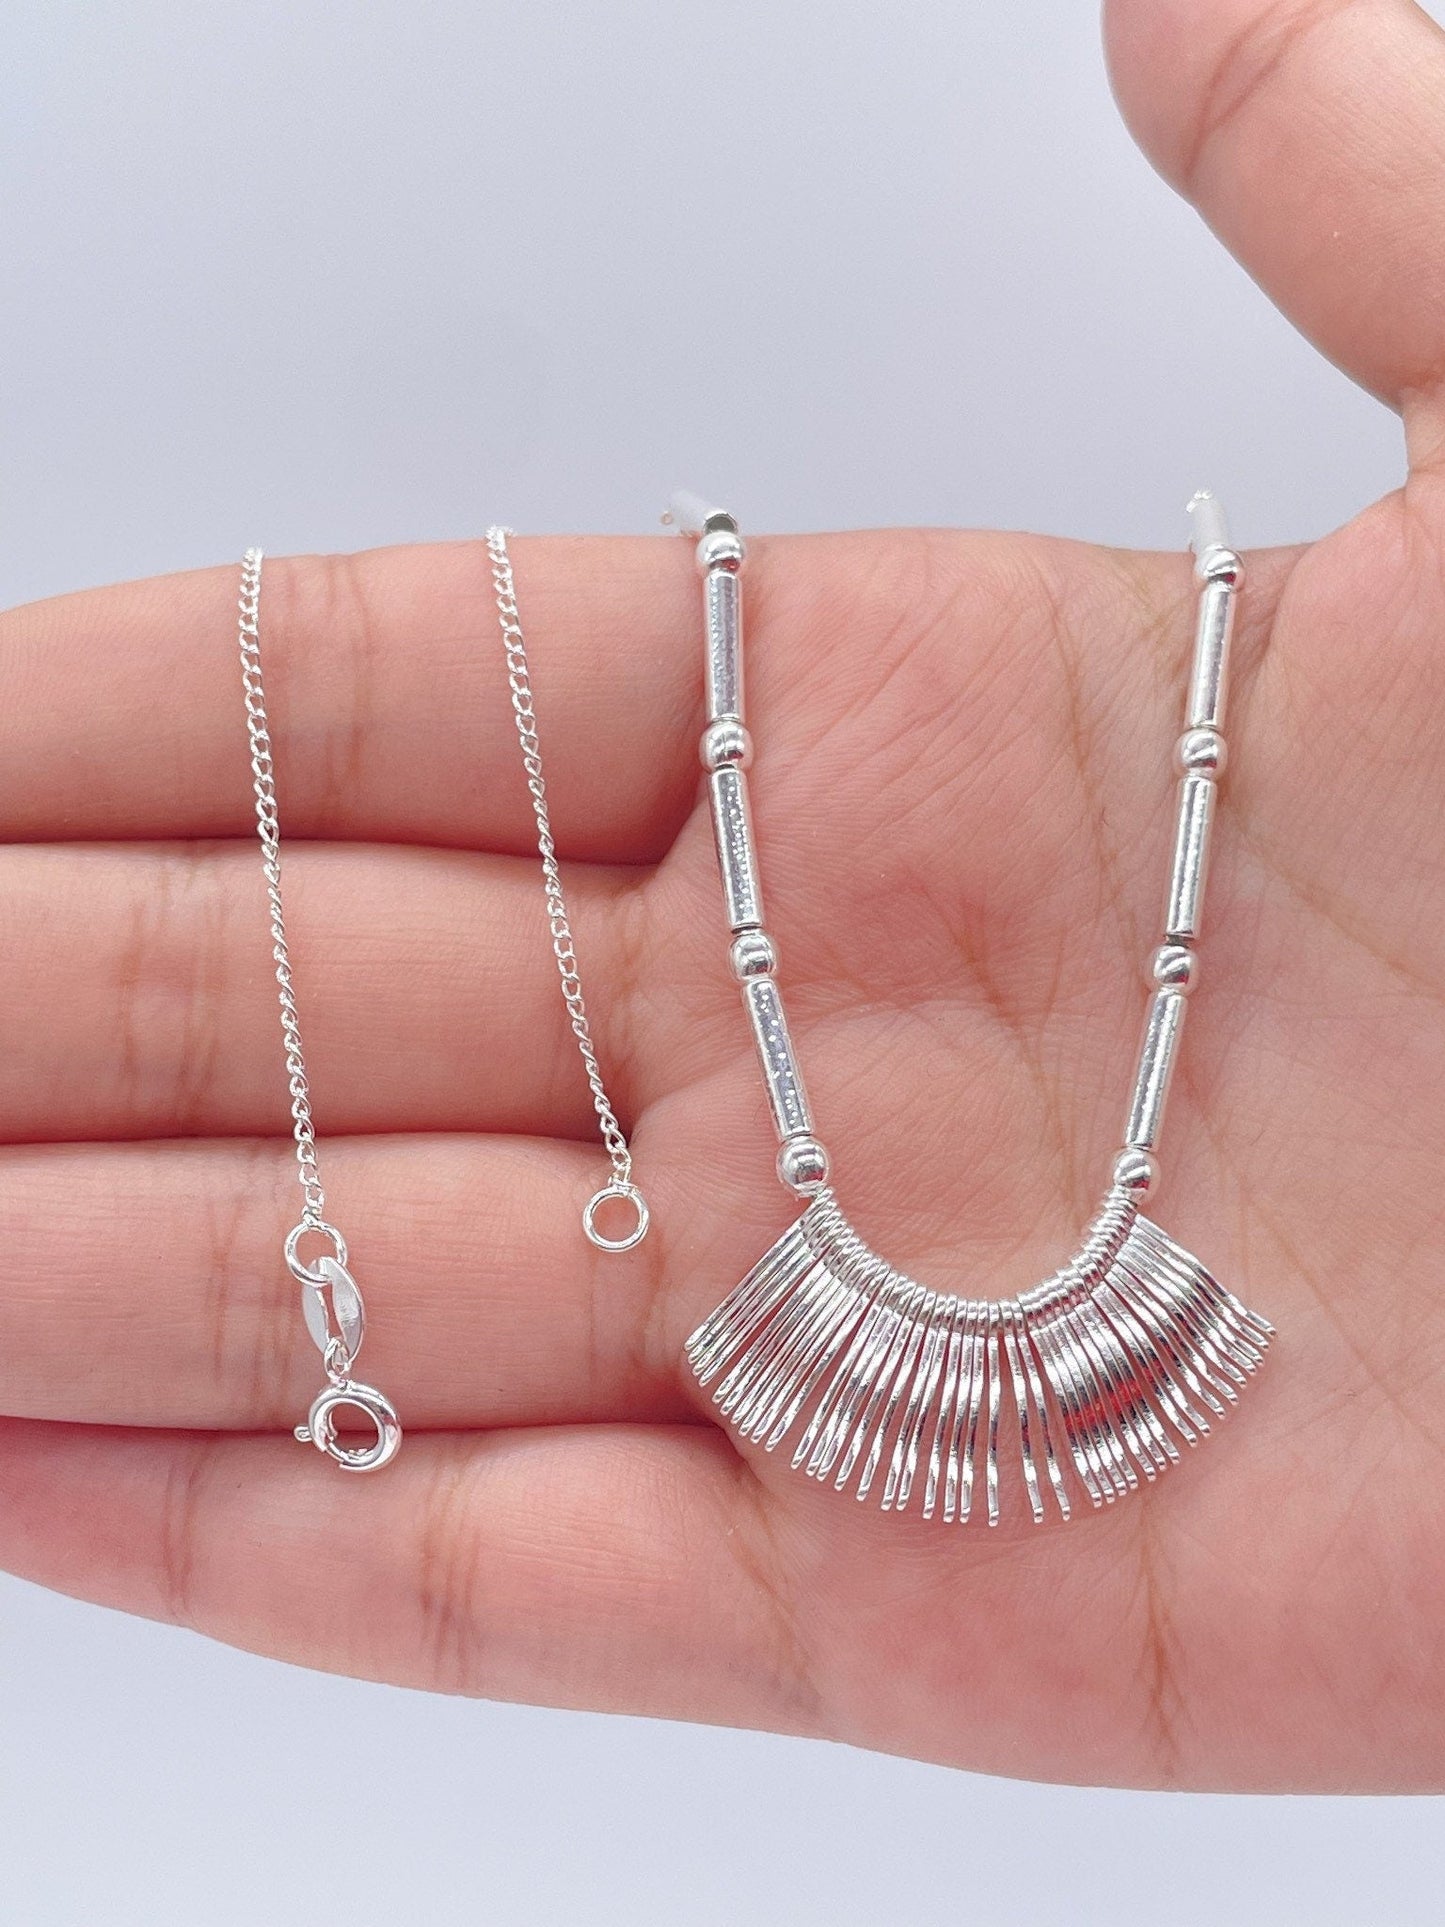 Silver Layered Fringe Necklace Featuring Tubes And Beads For Complete Boho